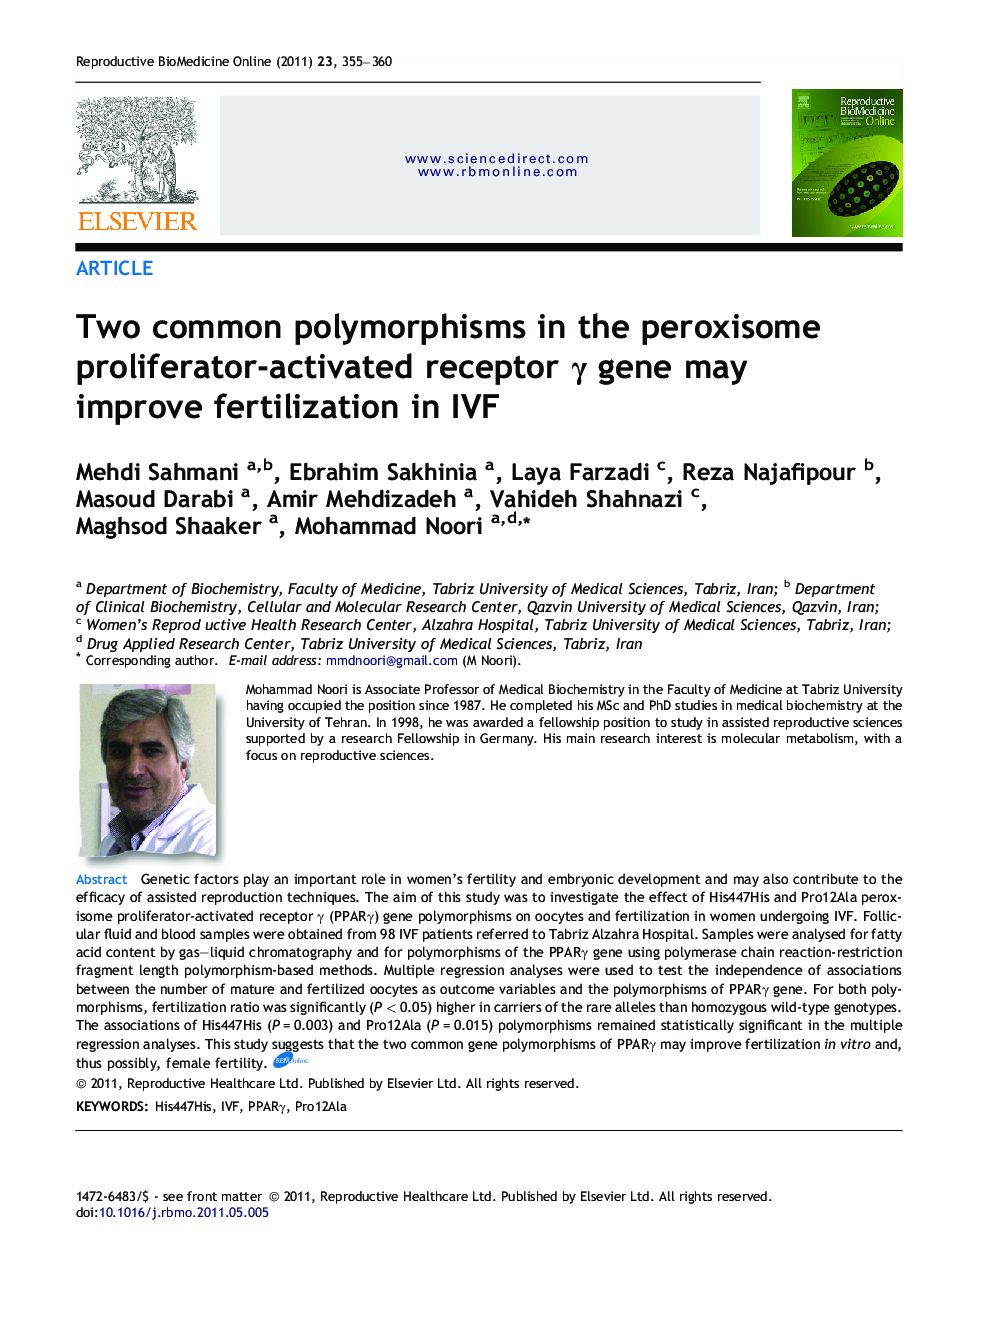 Two common polymorphisms in the peroxisome proliferator-activated receptor γ gene may improve fertilization in IVF 